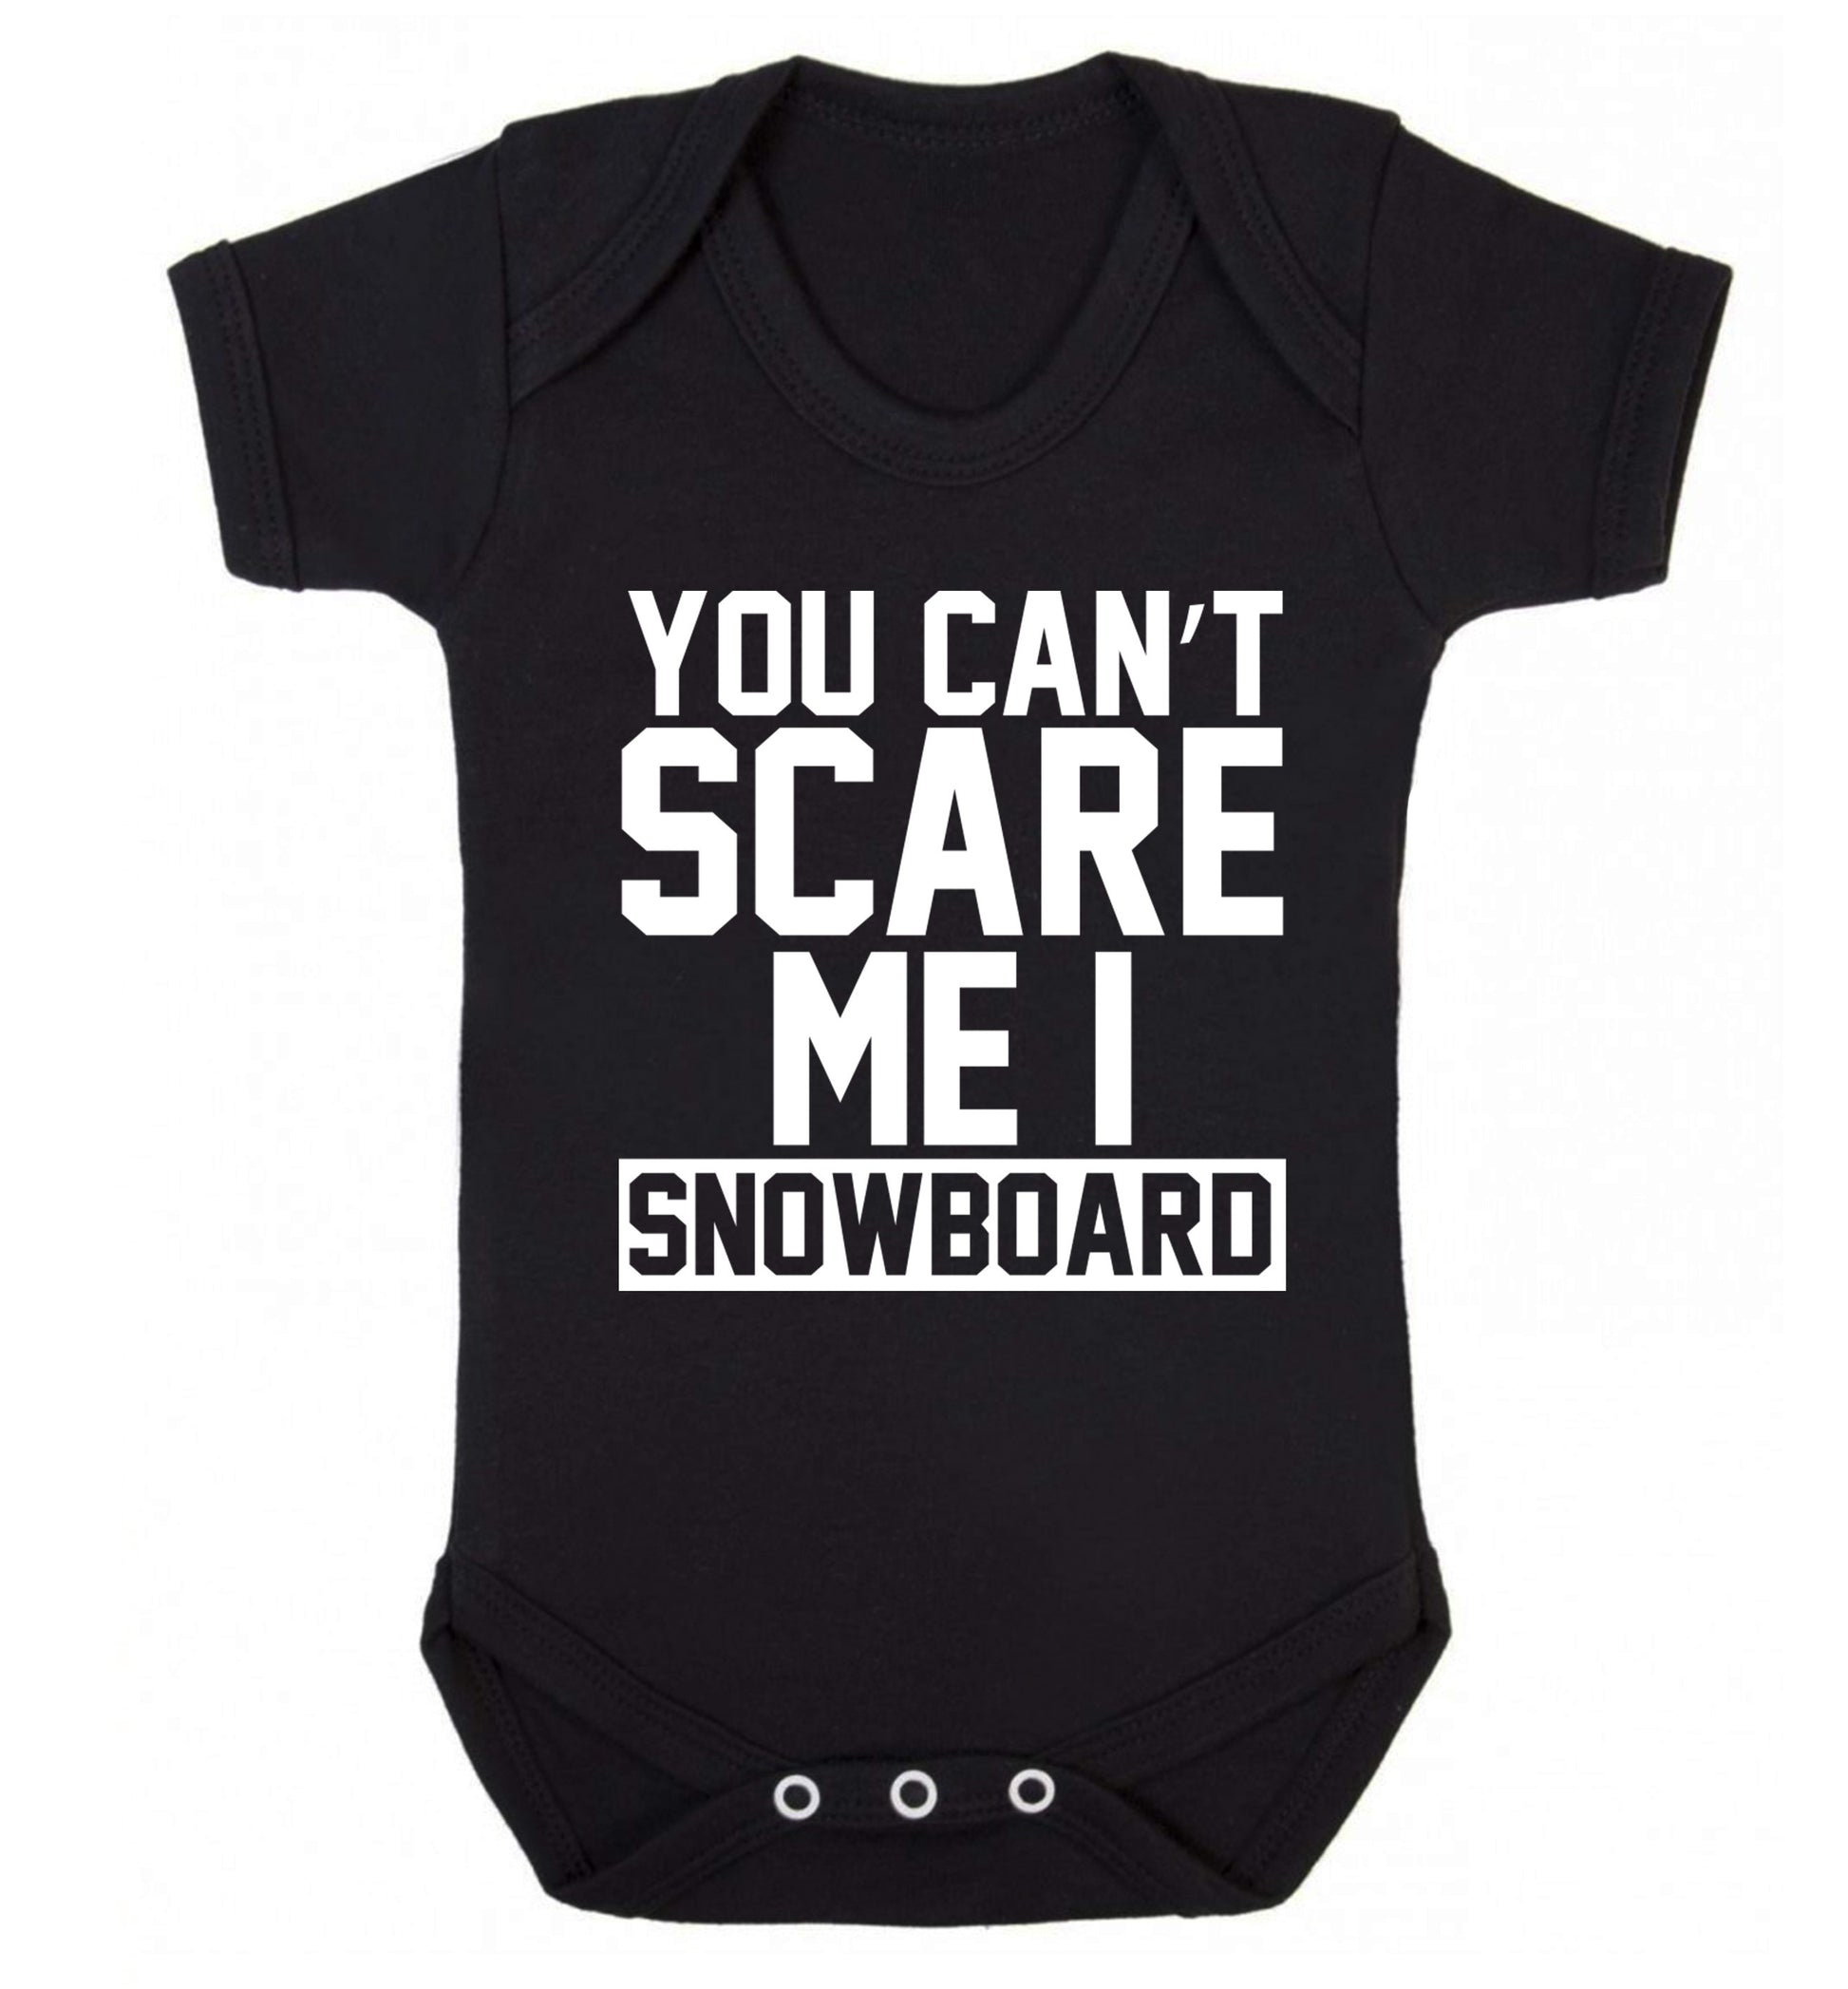 You can't scare me I snowboard Baby Vest black 18-24 months